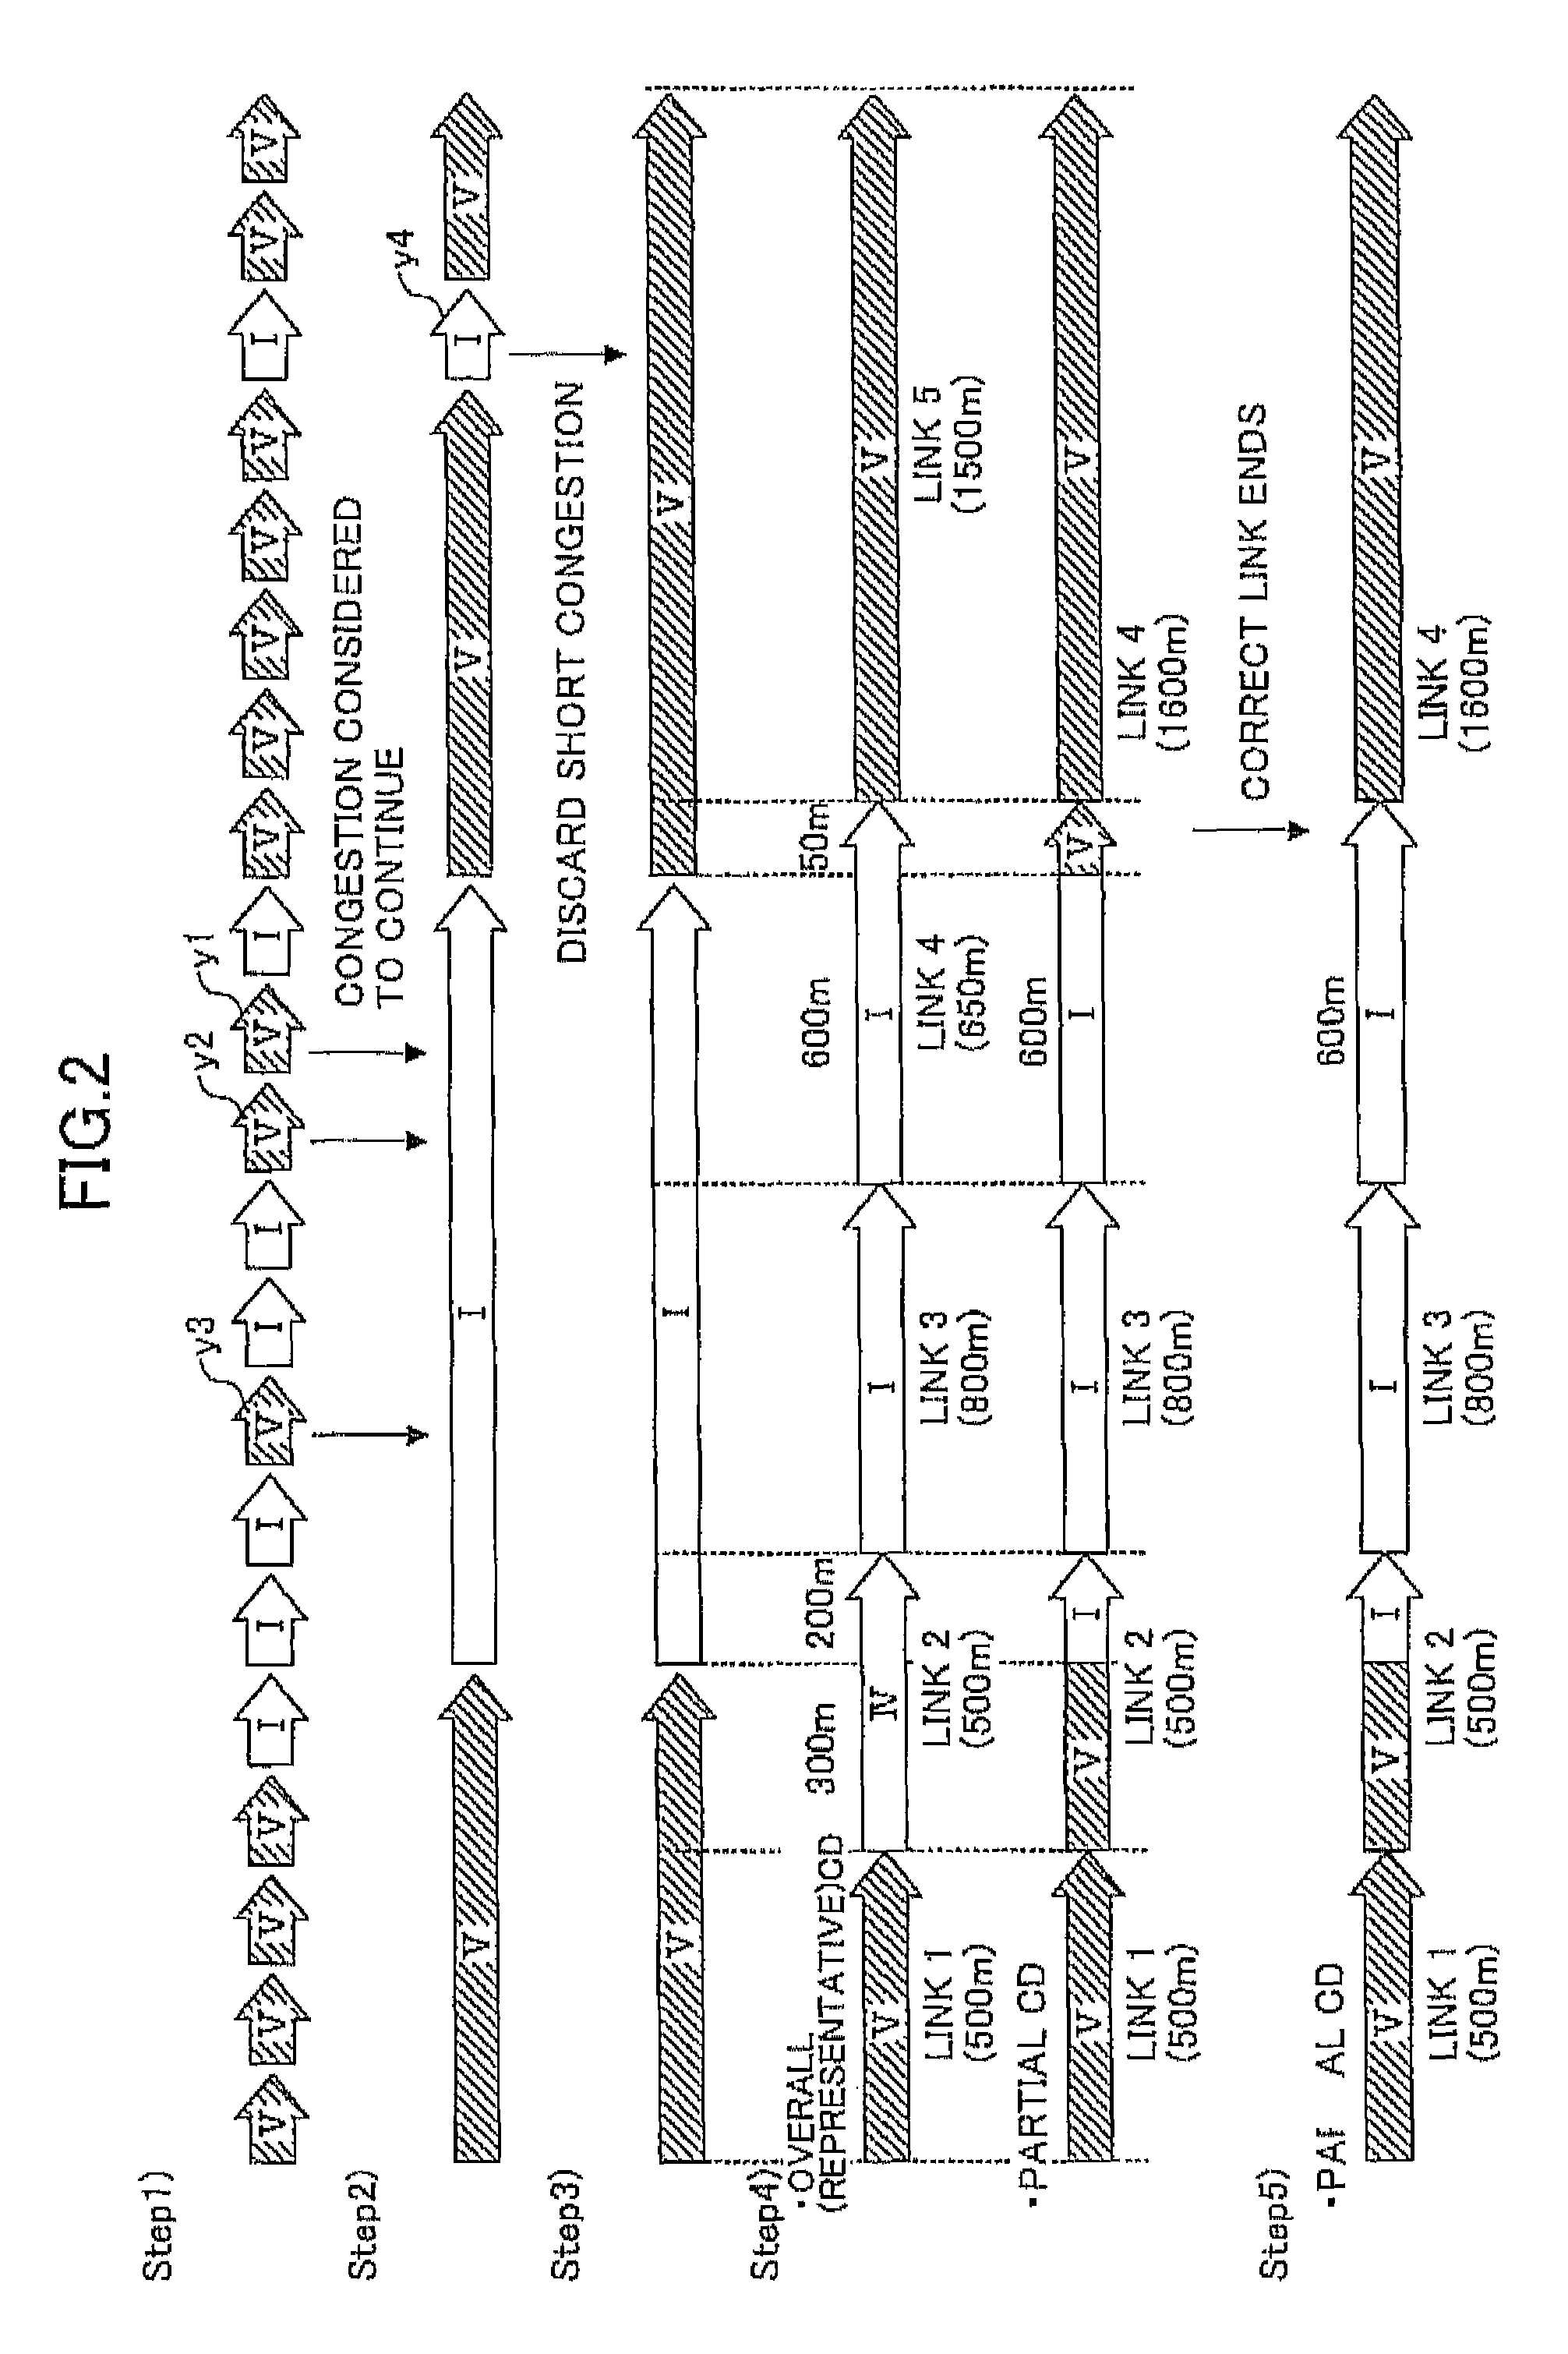 Traffic information generating method, traffic information generating apparatus, display, navigation system, and electronic control unit